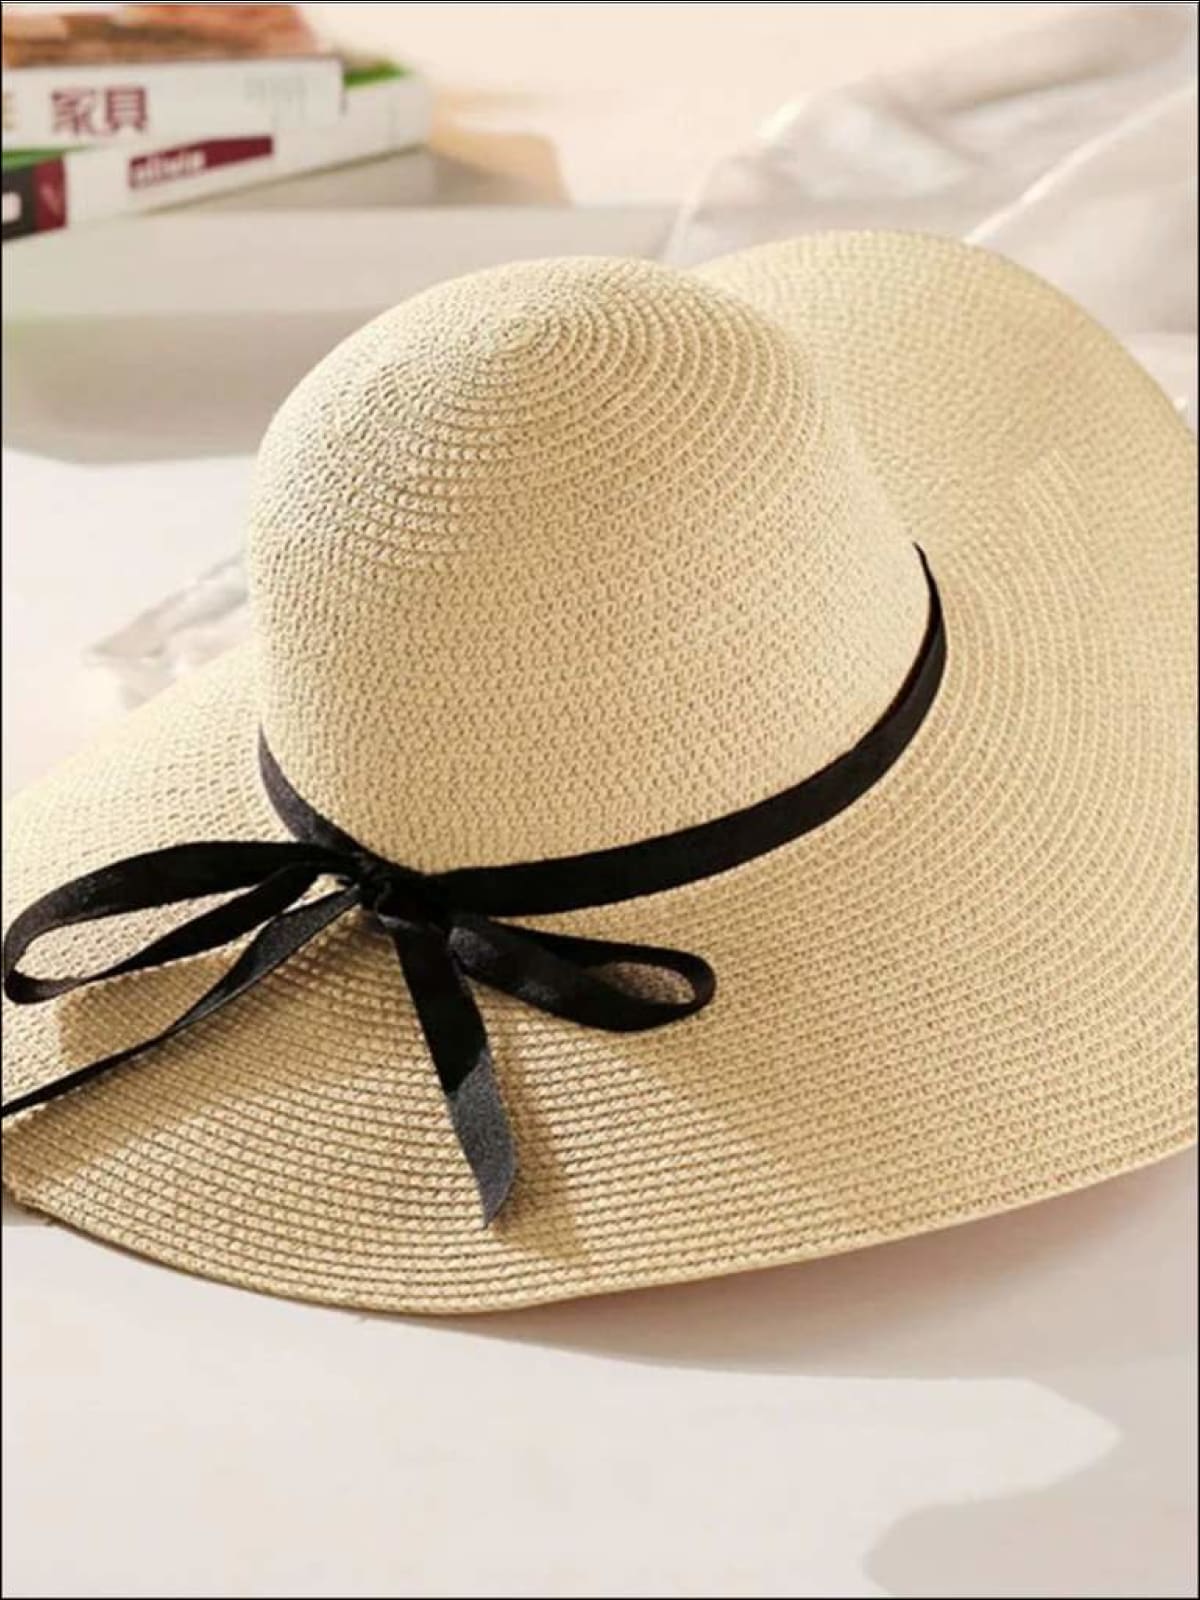 Womens Wide Brim Straw Hat with Black Ribbon (6 Color Options), Black